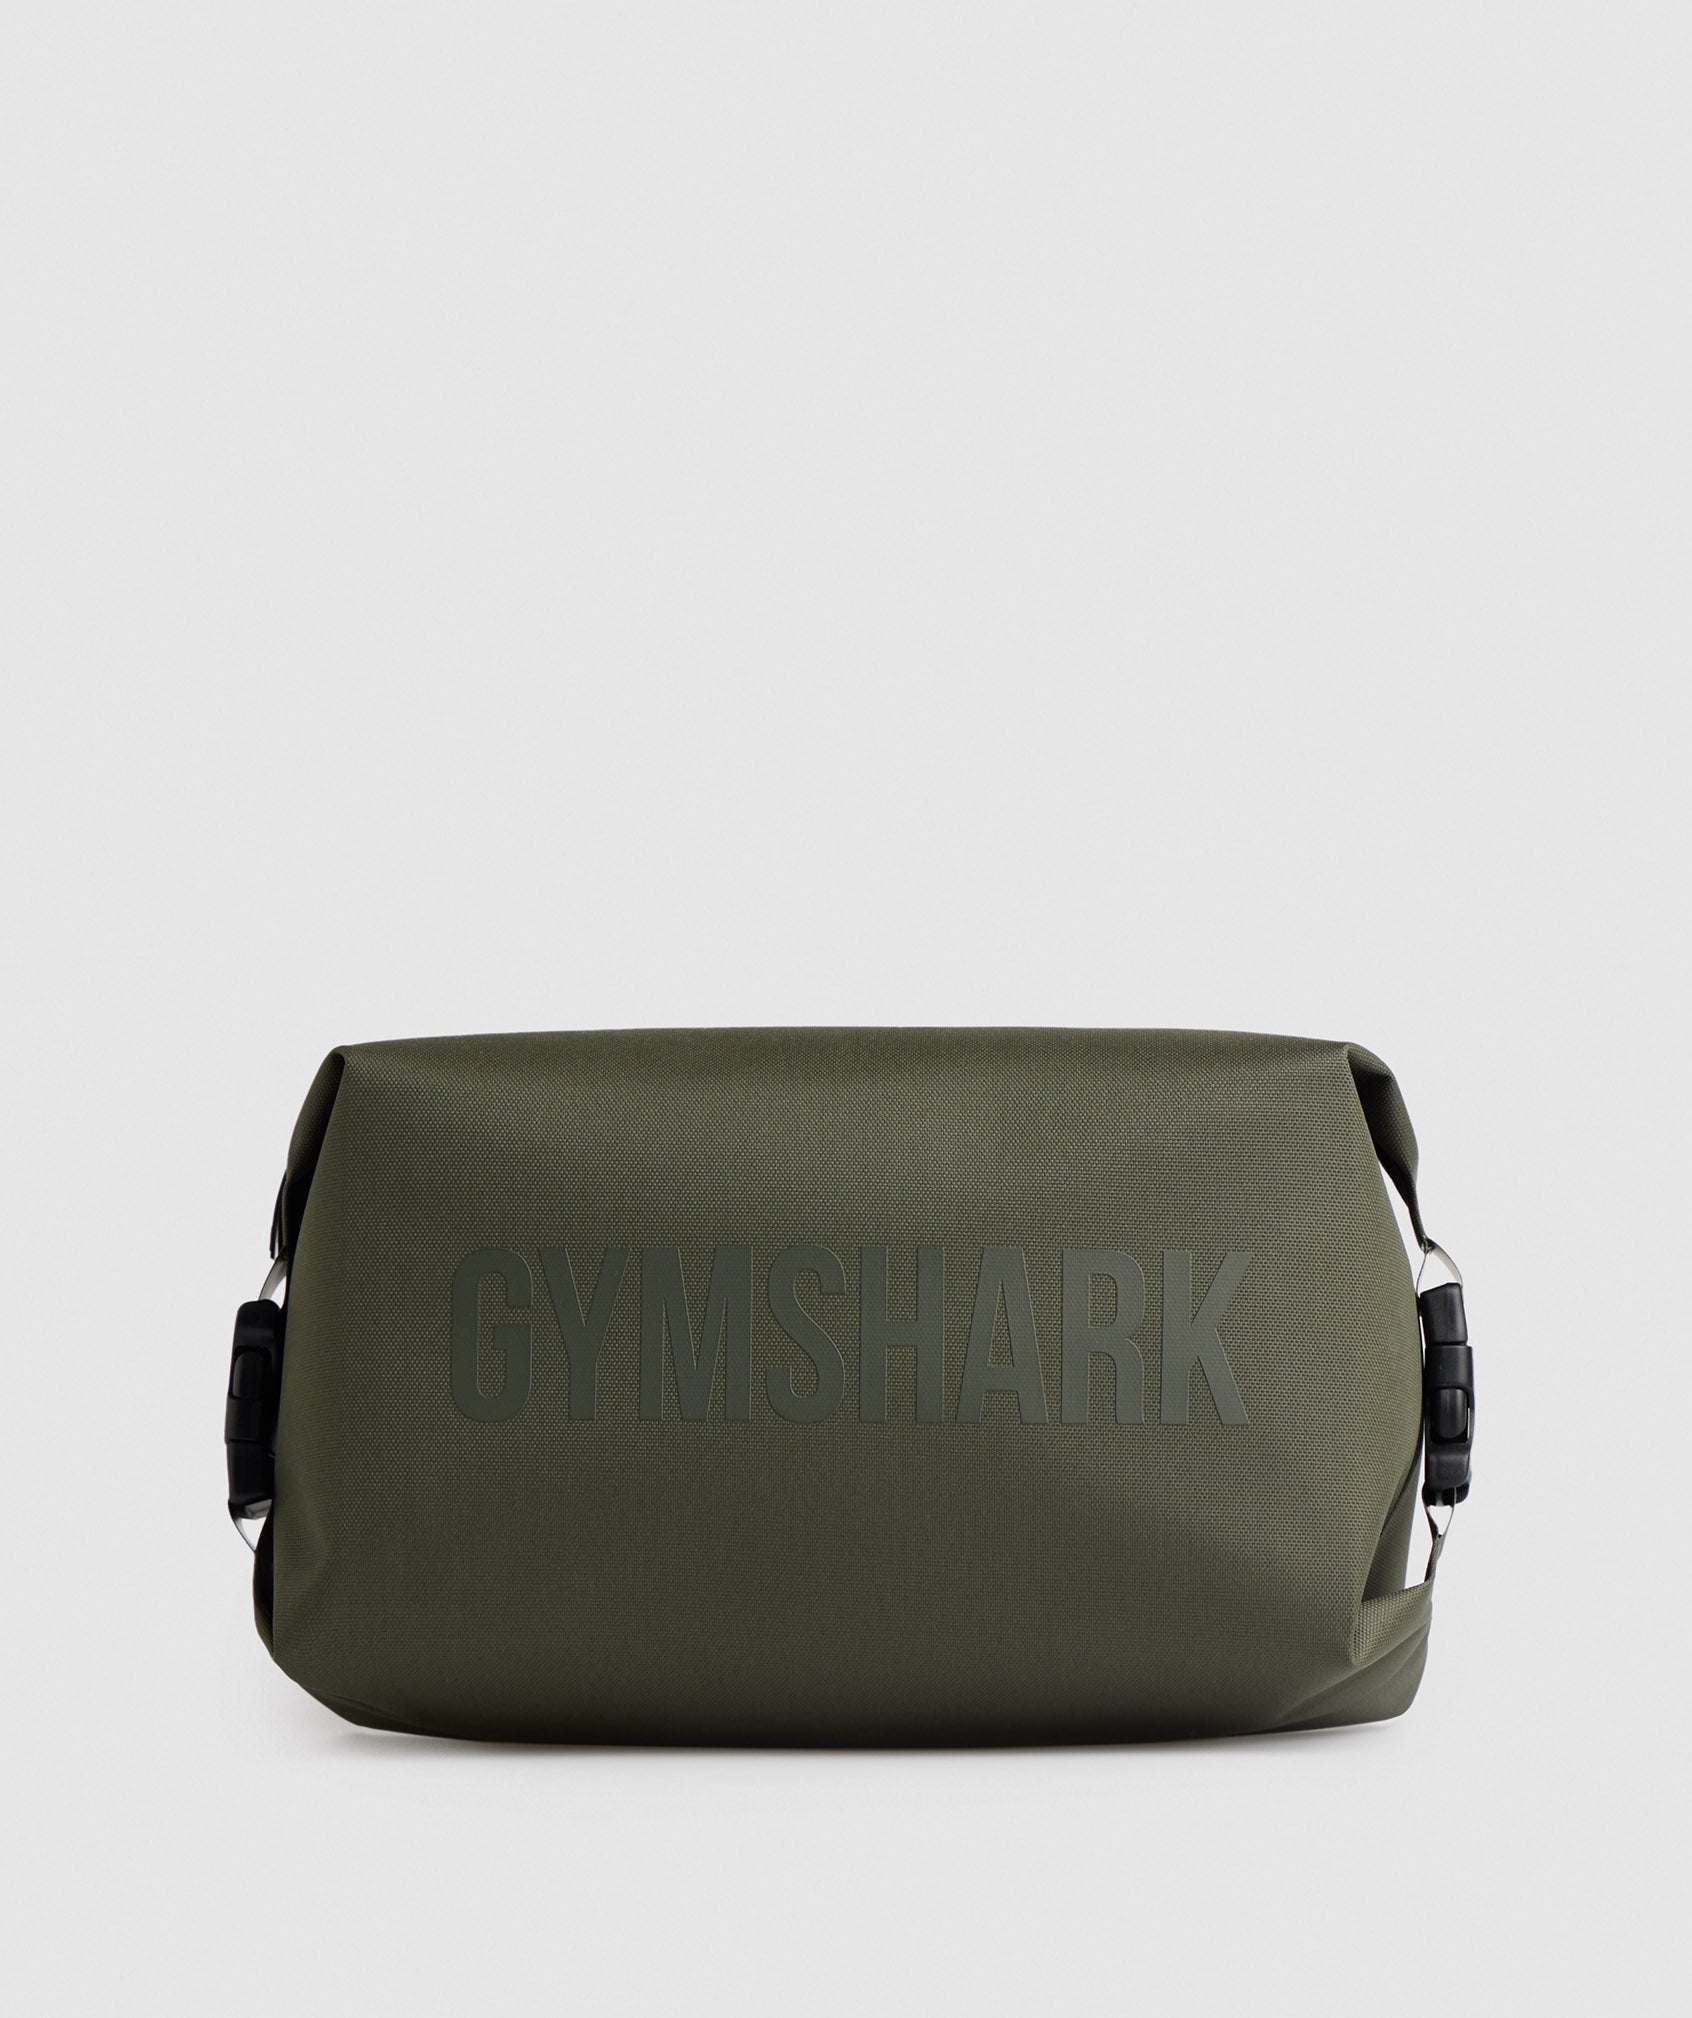 X-Series Wash Bag in Core Olive - view 1